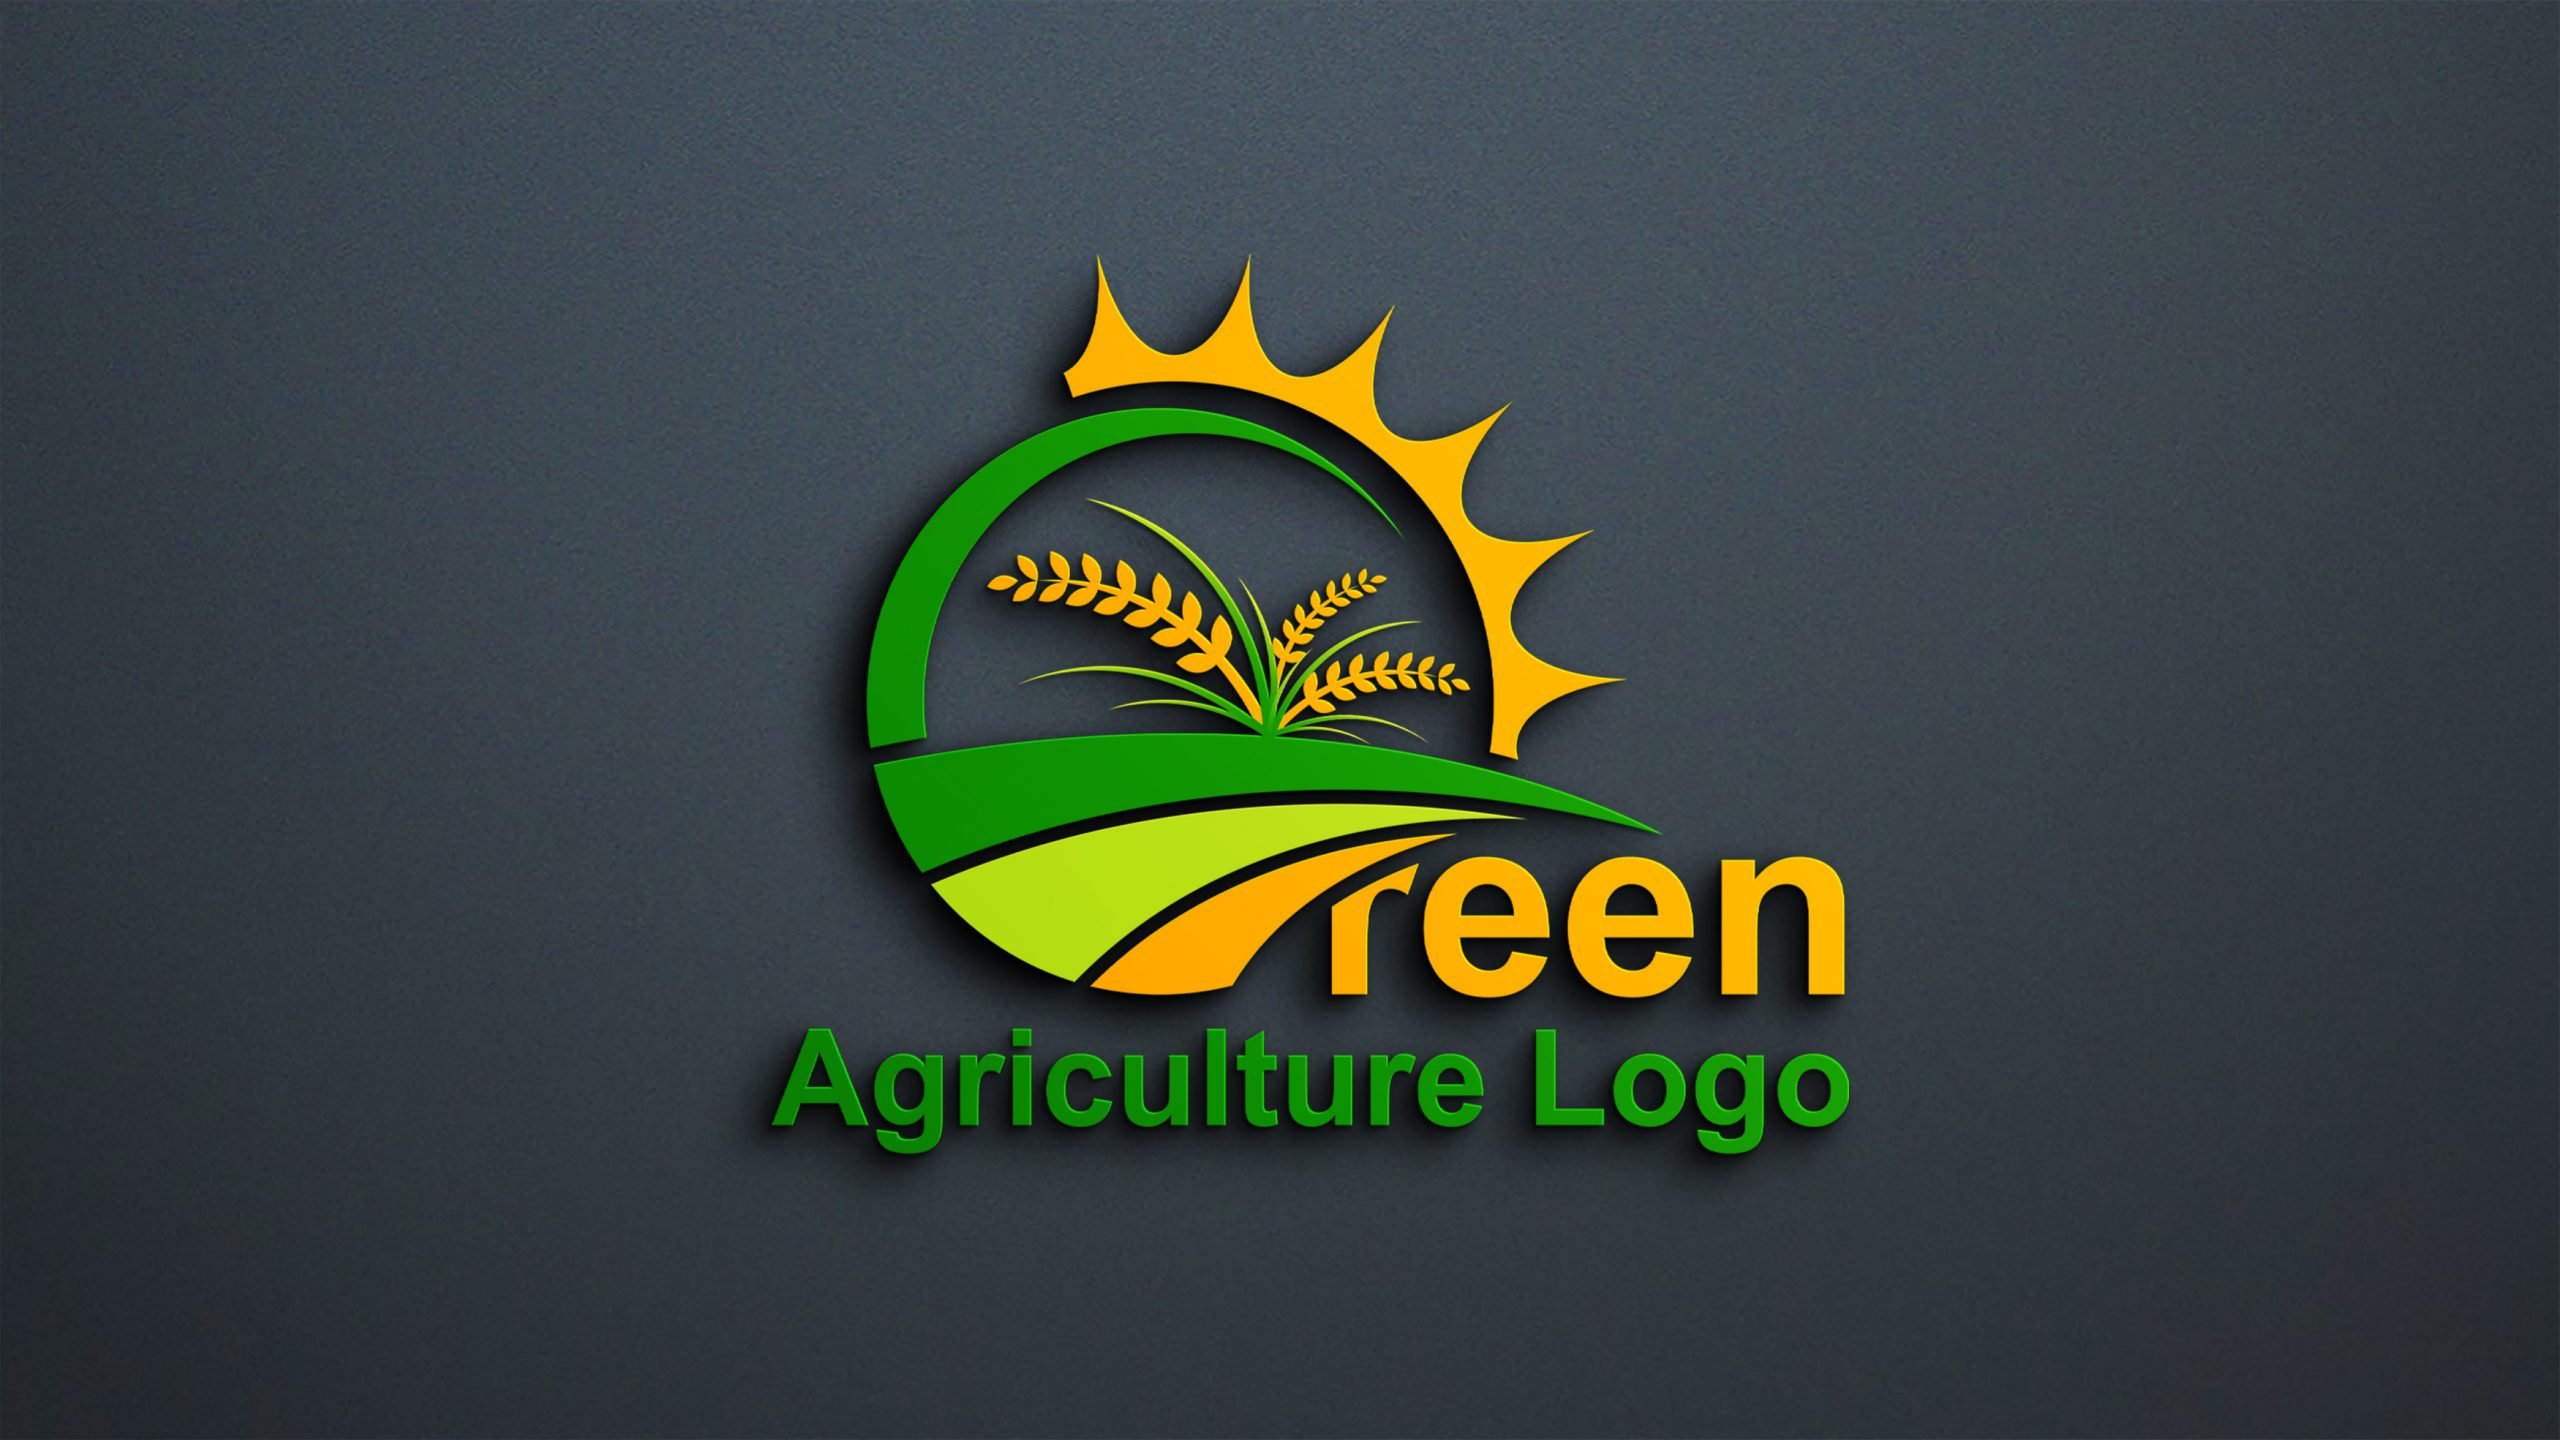 agriculture icon vector